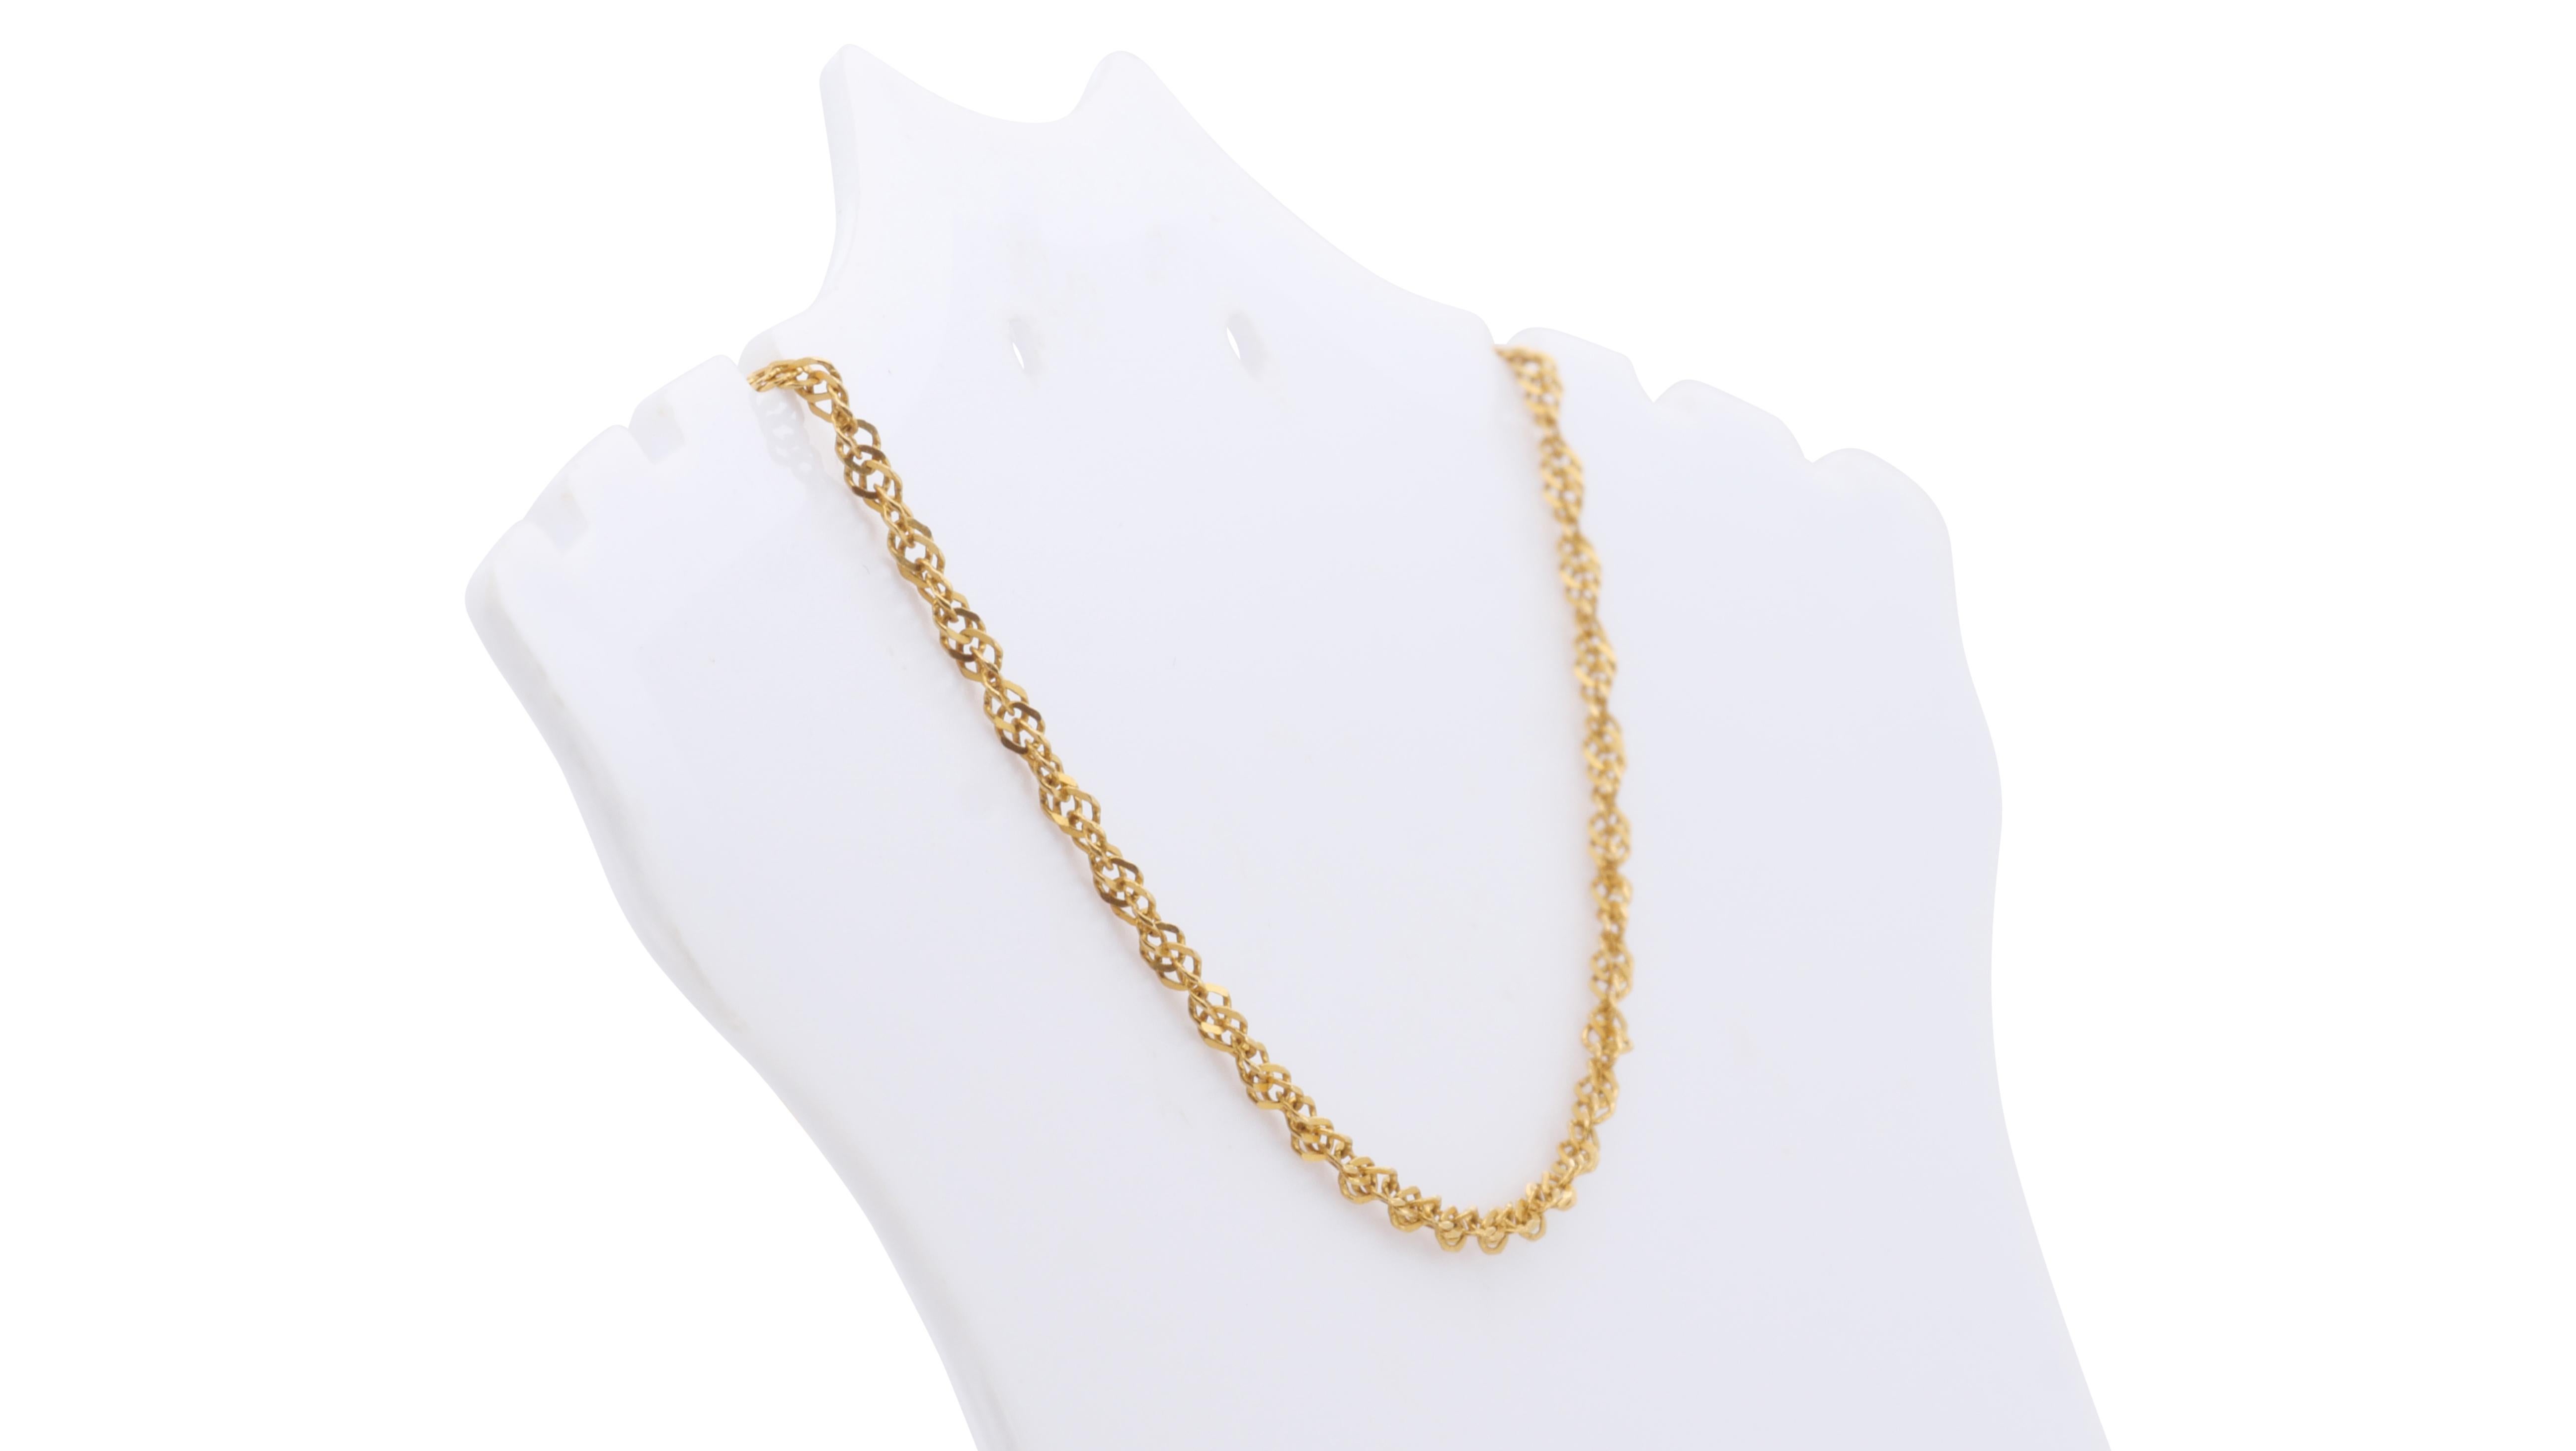 Women's High Quality 14k Yellow Gold Chain Necklace